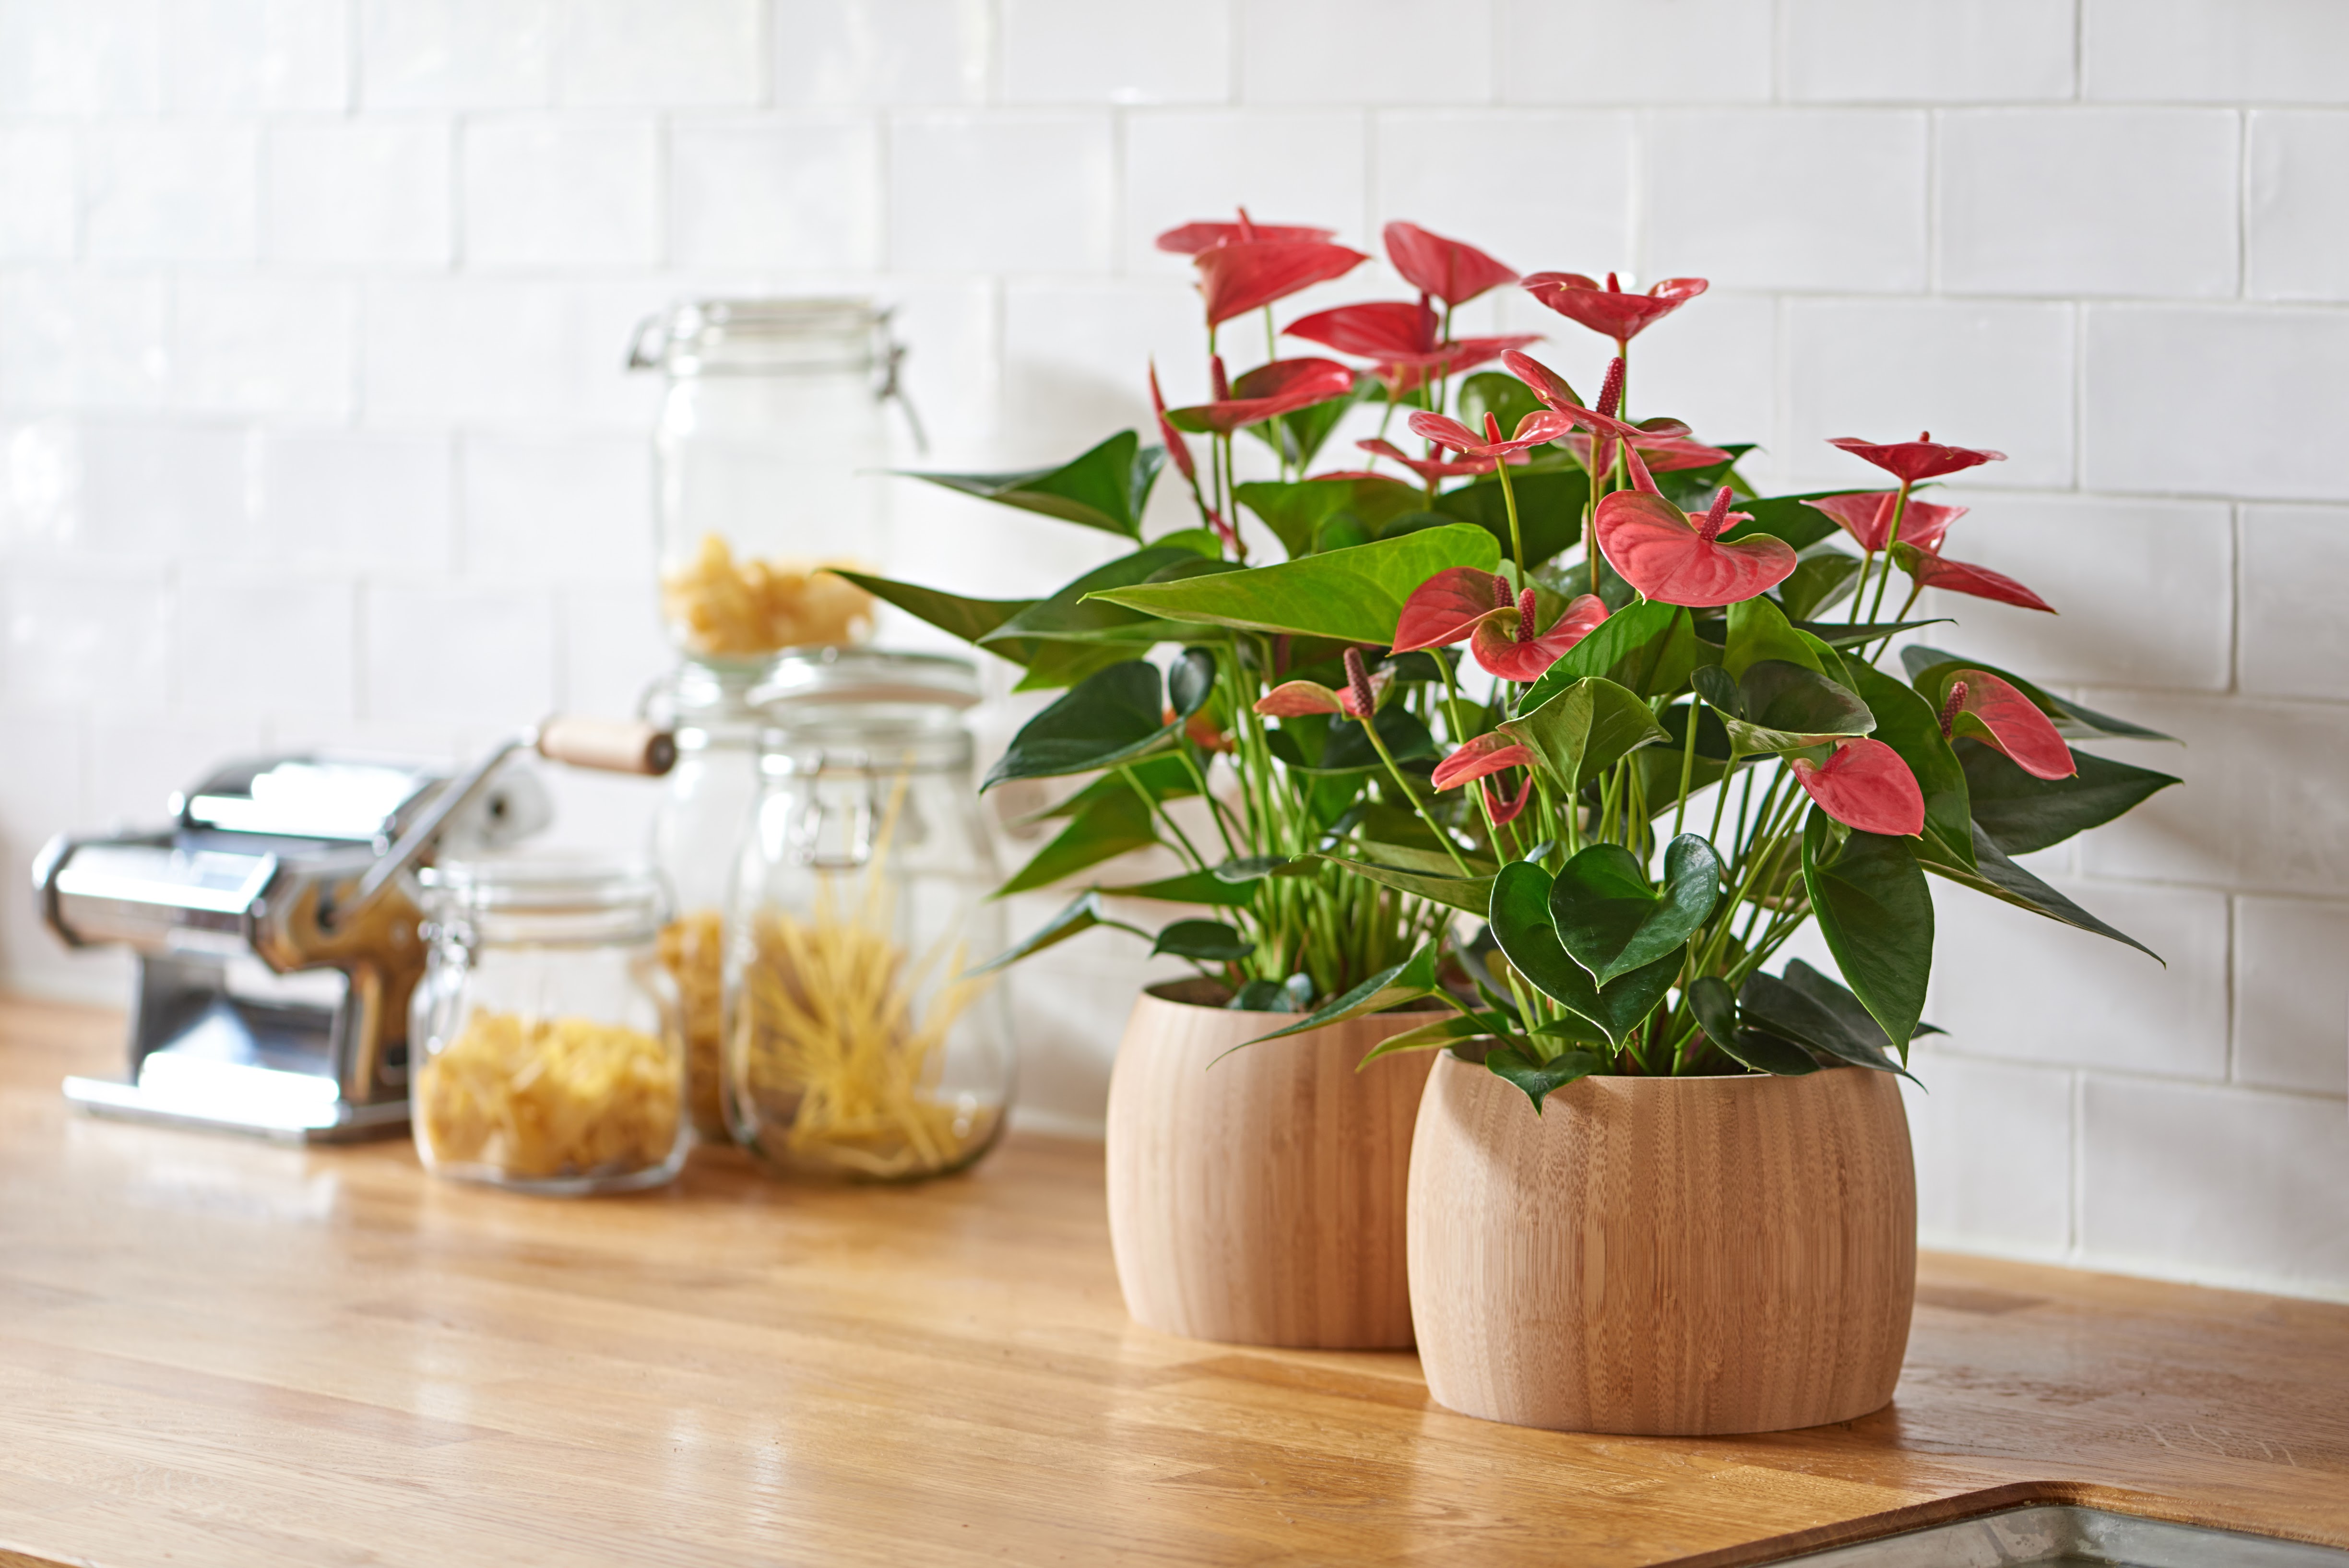 How to take care of the Anthurium pot plant and cut flower